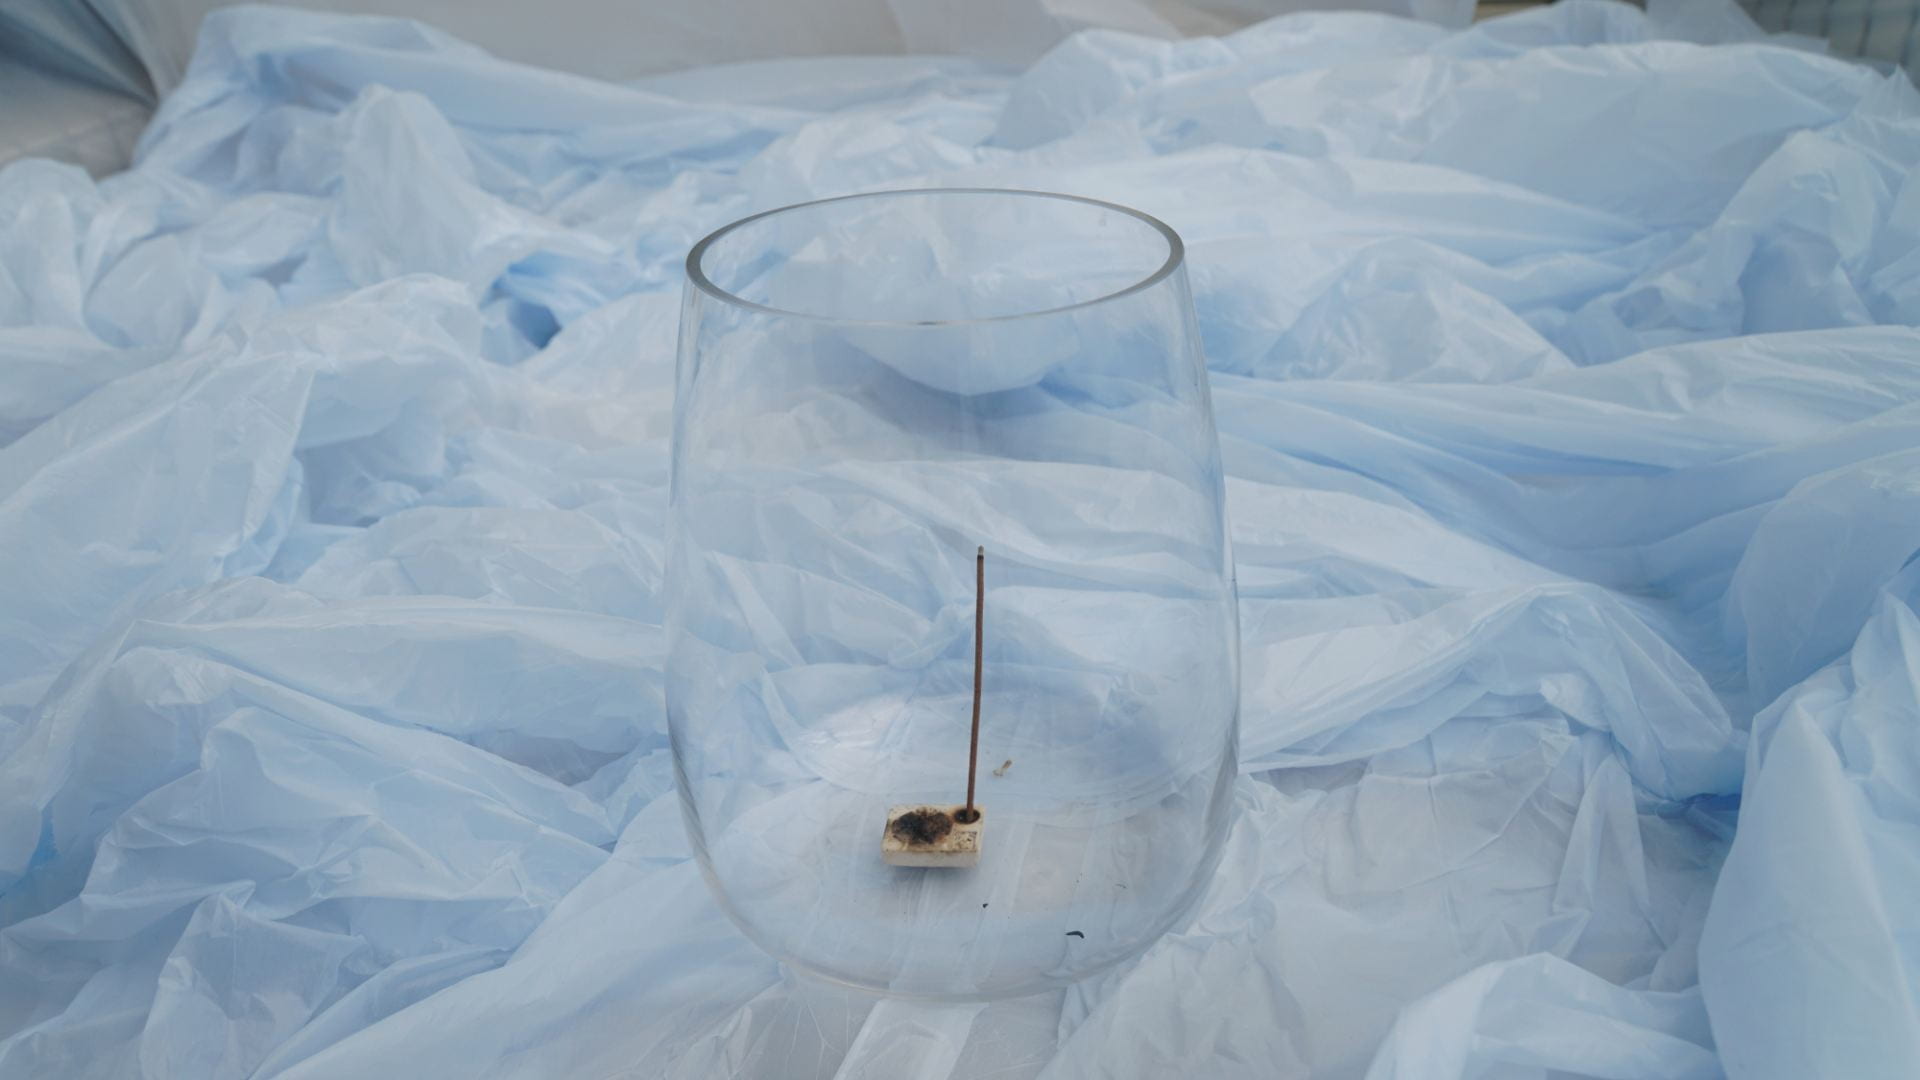 An incense burning in a glass jar surrounded by plastic tablecloths installed in the background.